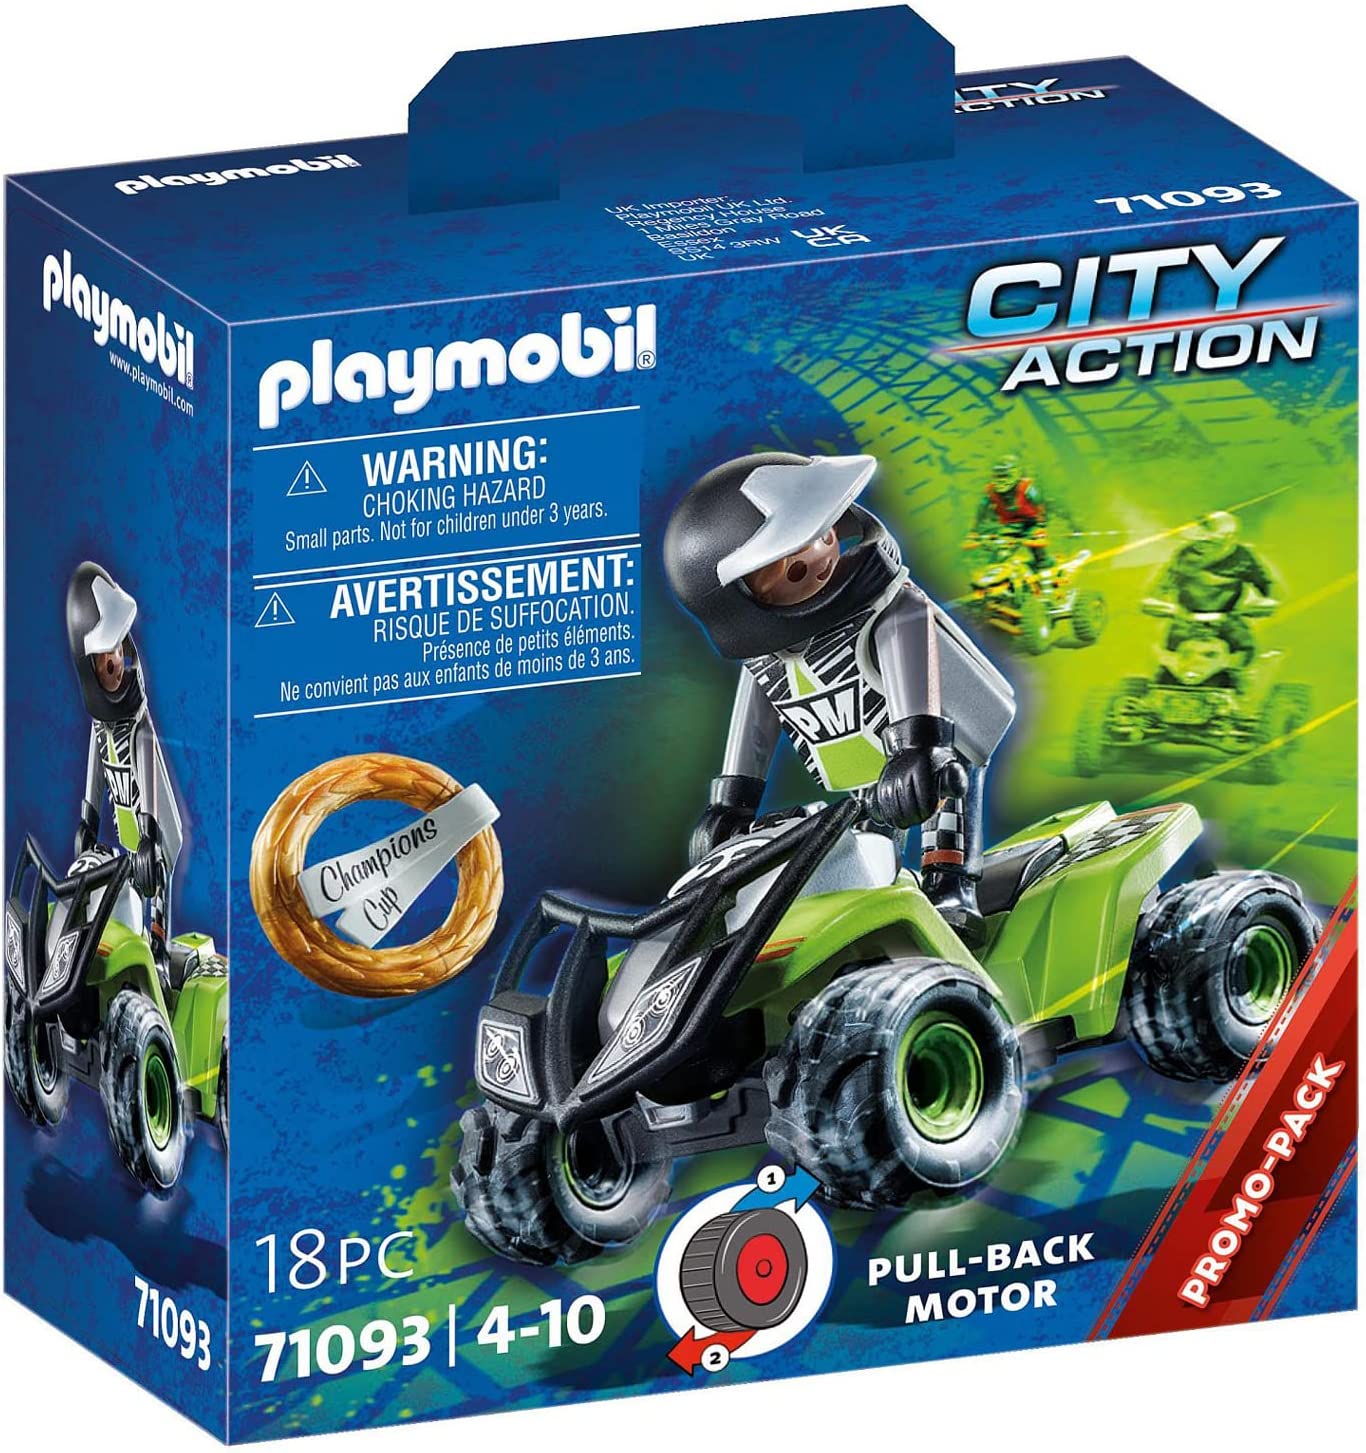 PLAYMOBIL City Action 71093 Racing-Speed Quad with Pull-Back Motor for Ages 4 Years and Above